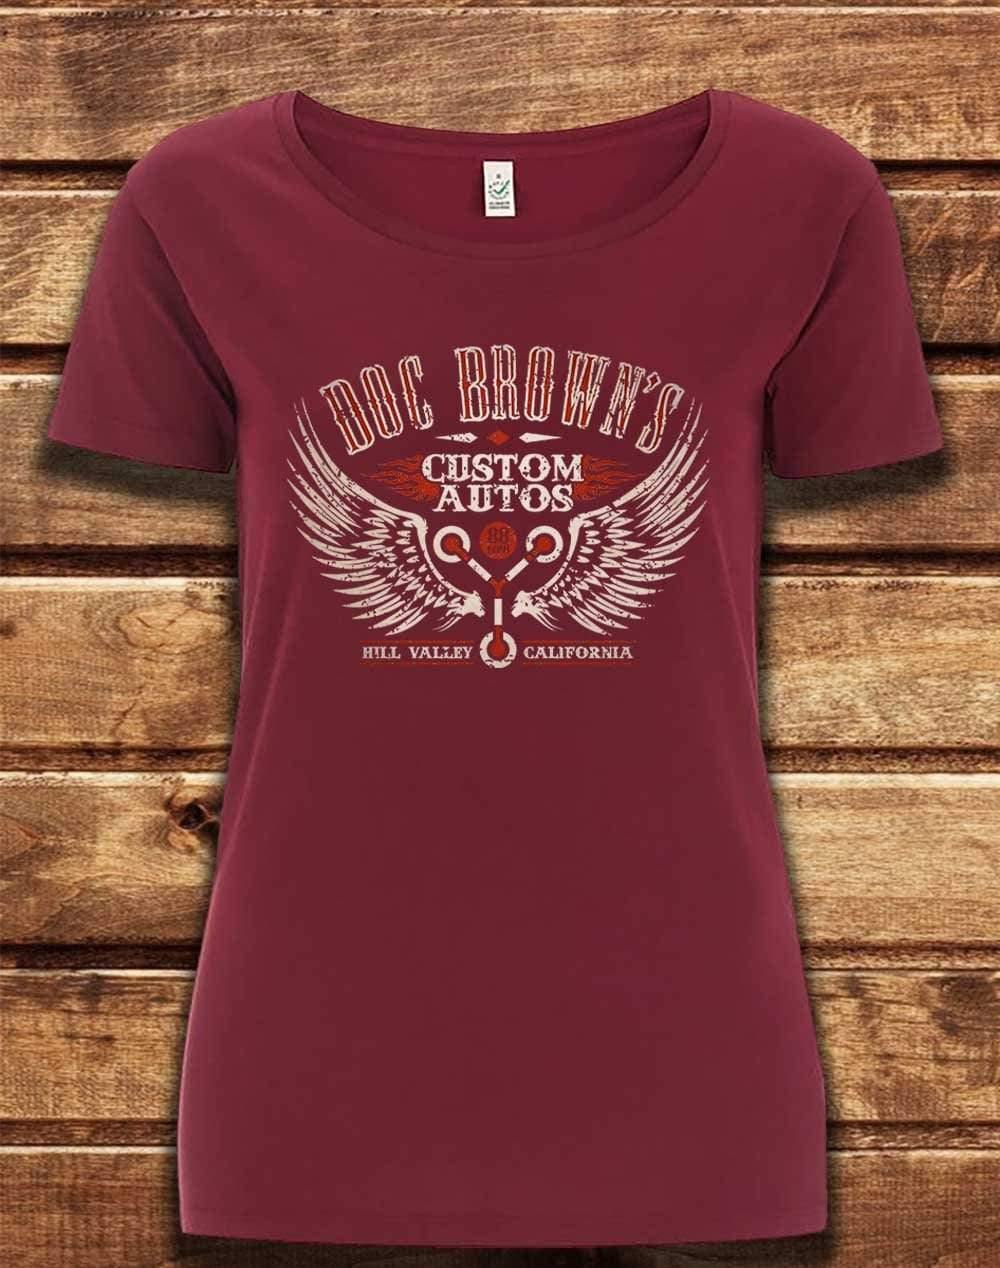 DELUXE Doc Brown's Autos Organic Scoop Neck T-Shirt 8-10 / Burgundy  - Off World Tees